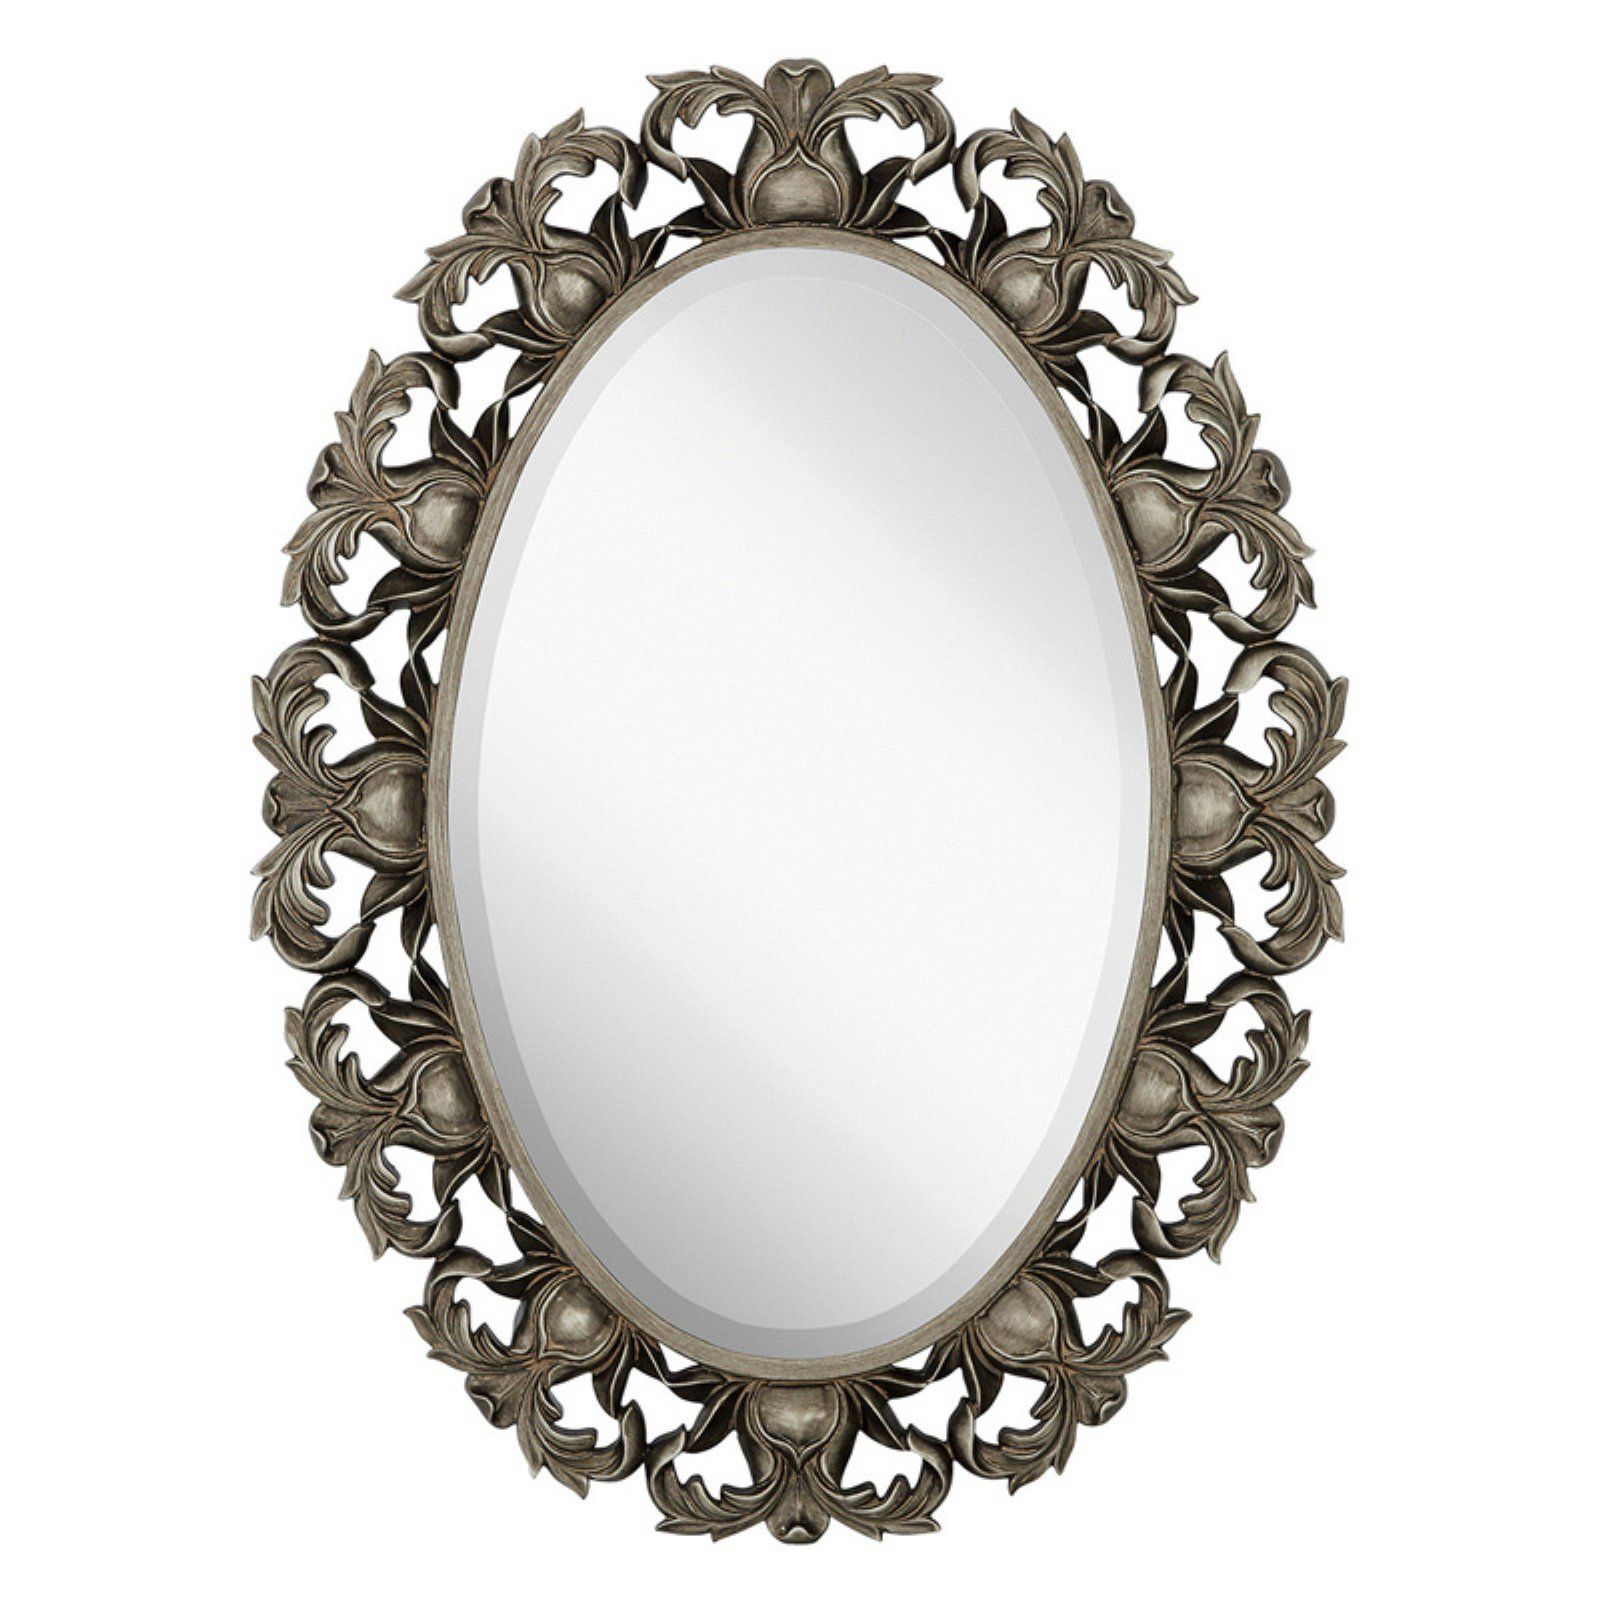 Newest Oval Metallic Accent Mirrors In Majestic Mirror Oval Beveled Glass Framed Accent Wall Mirror – 34w X (View 15 of 20)